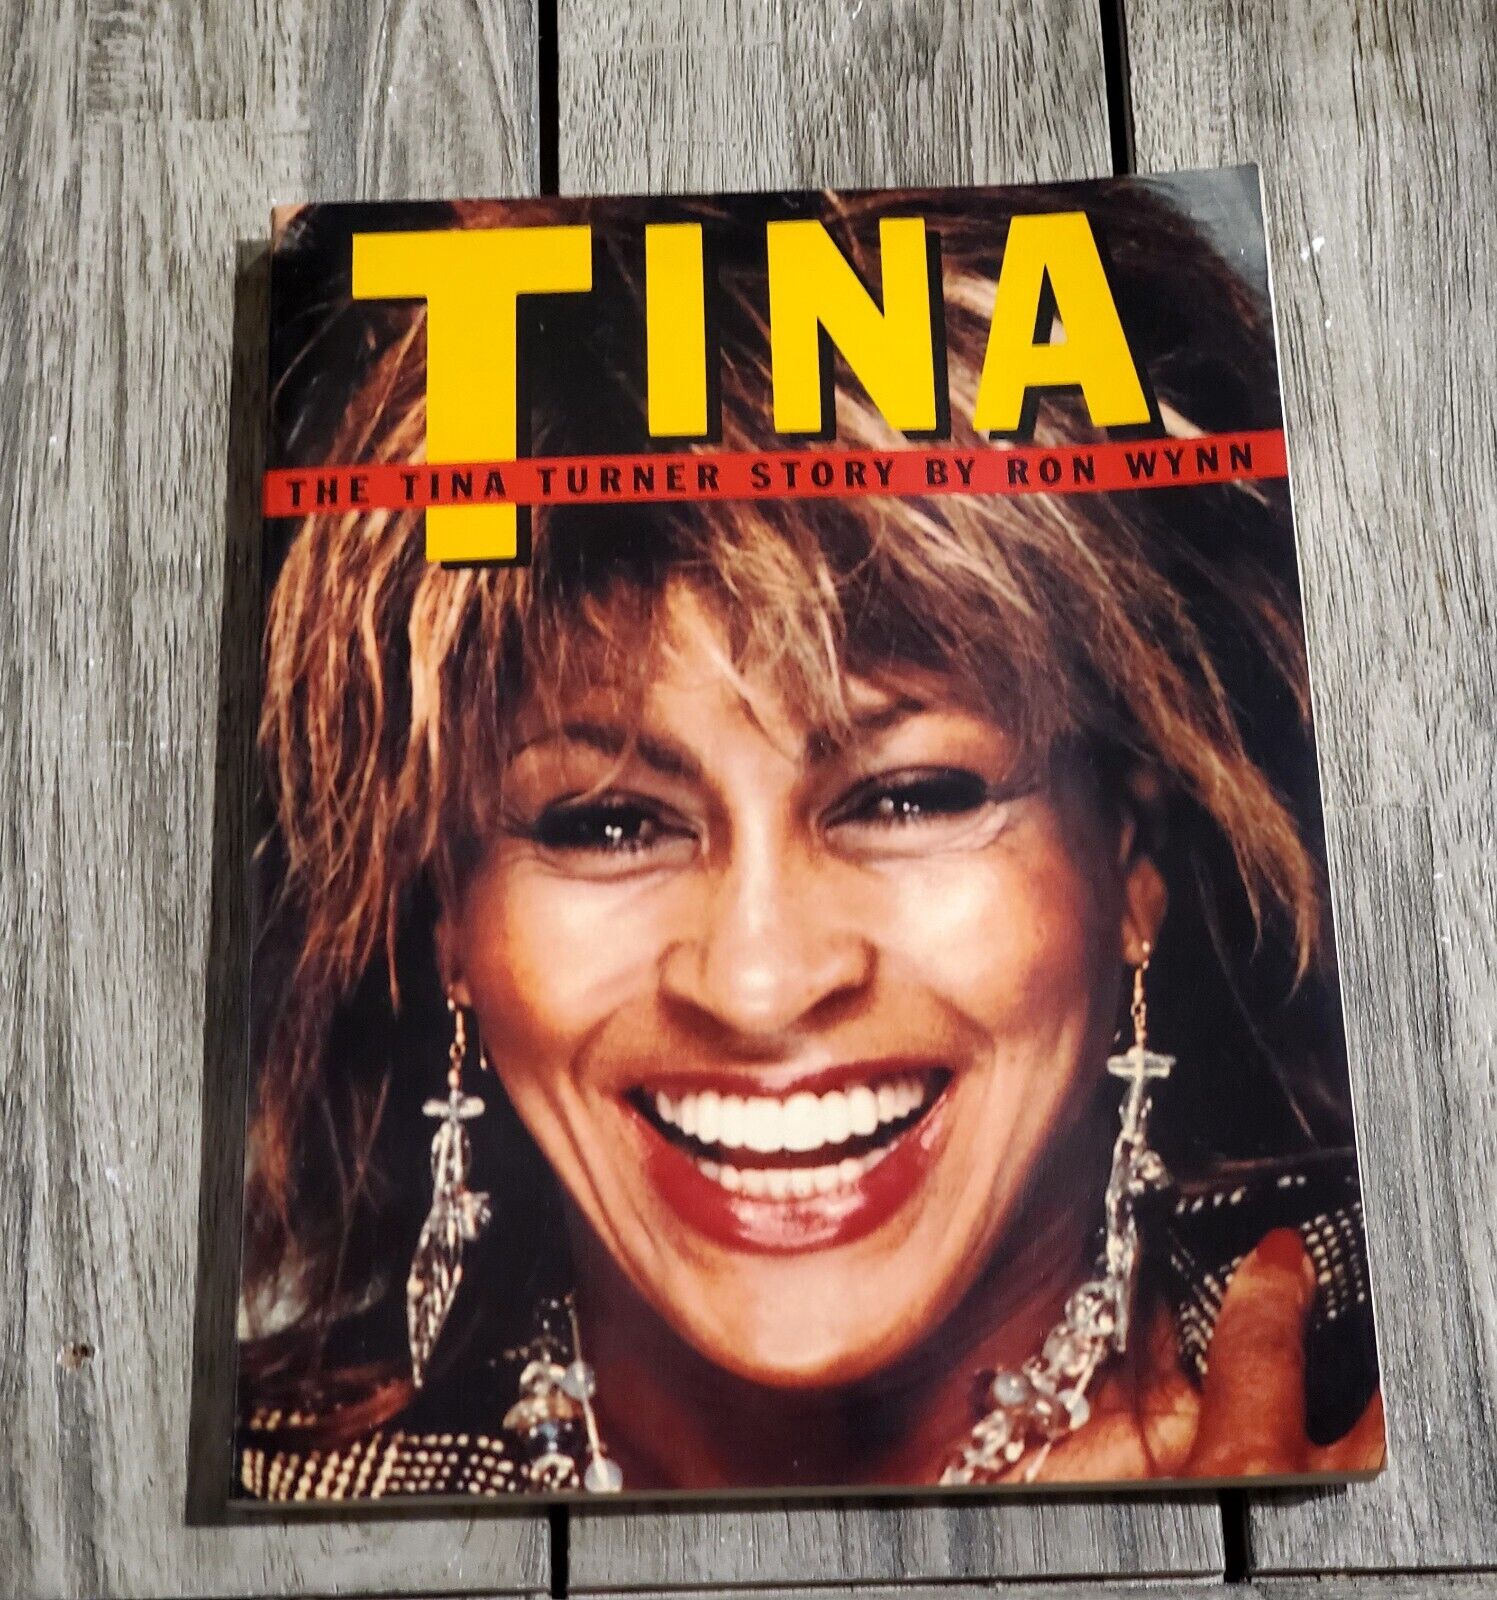 1985 THE TINA TURNER STORY BOOK 158 PAGES WITH COLOR & B/W PHOTOS BY RON WYNN